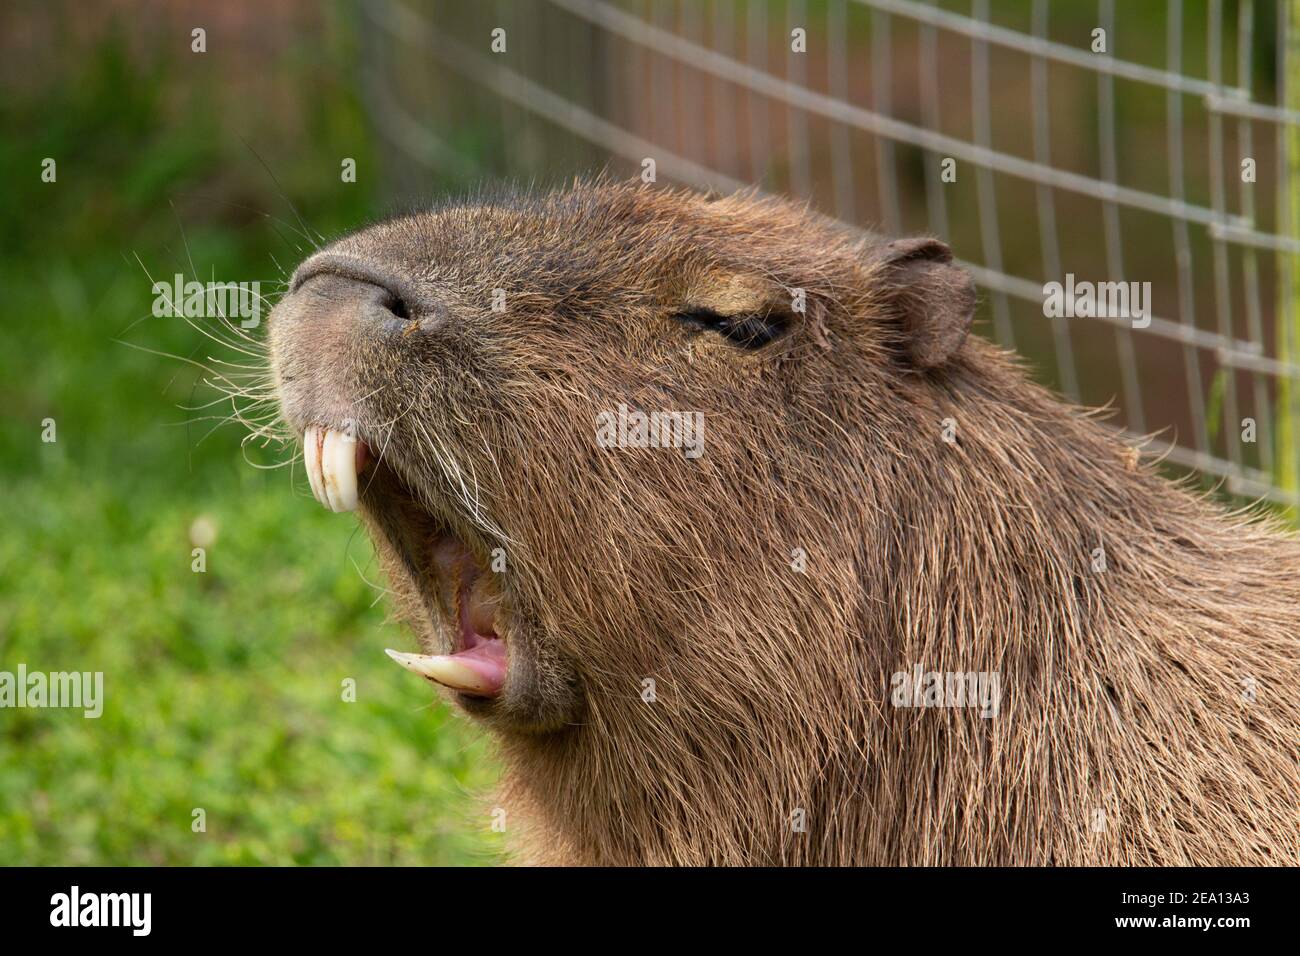 Capybara (Hydrochoerus hydrochaeris) head and shoulders of a Capybara showing his teeth with a fence and grass behind Stock Photo